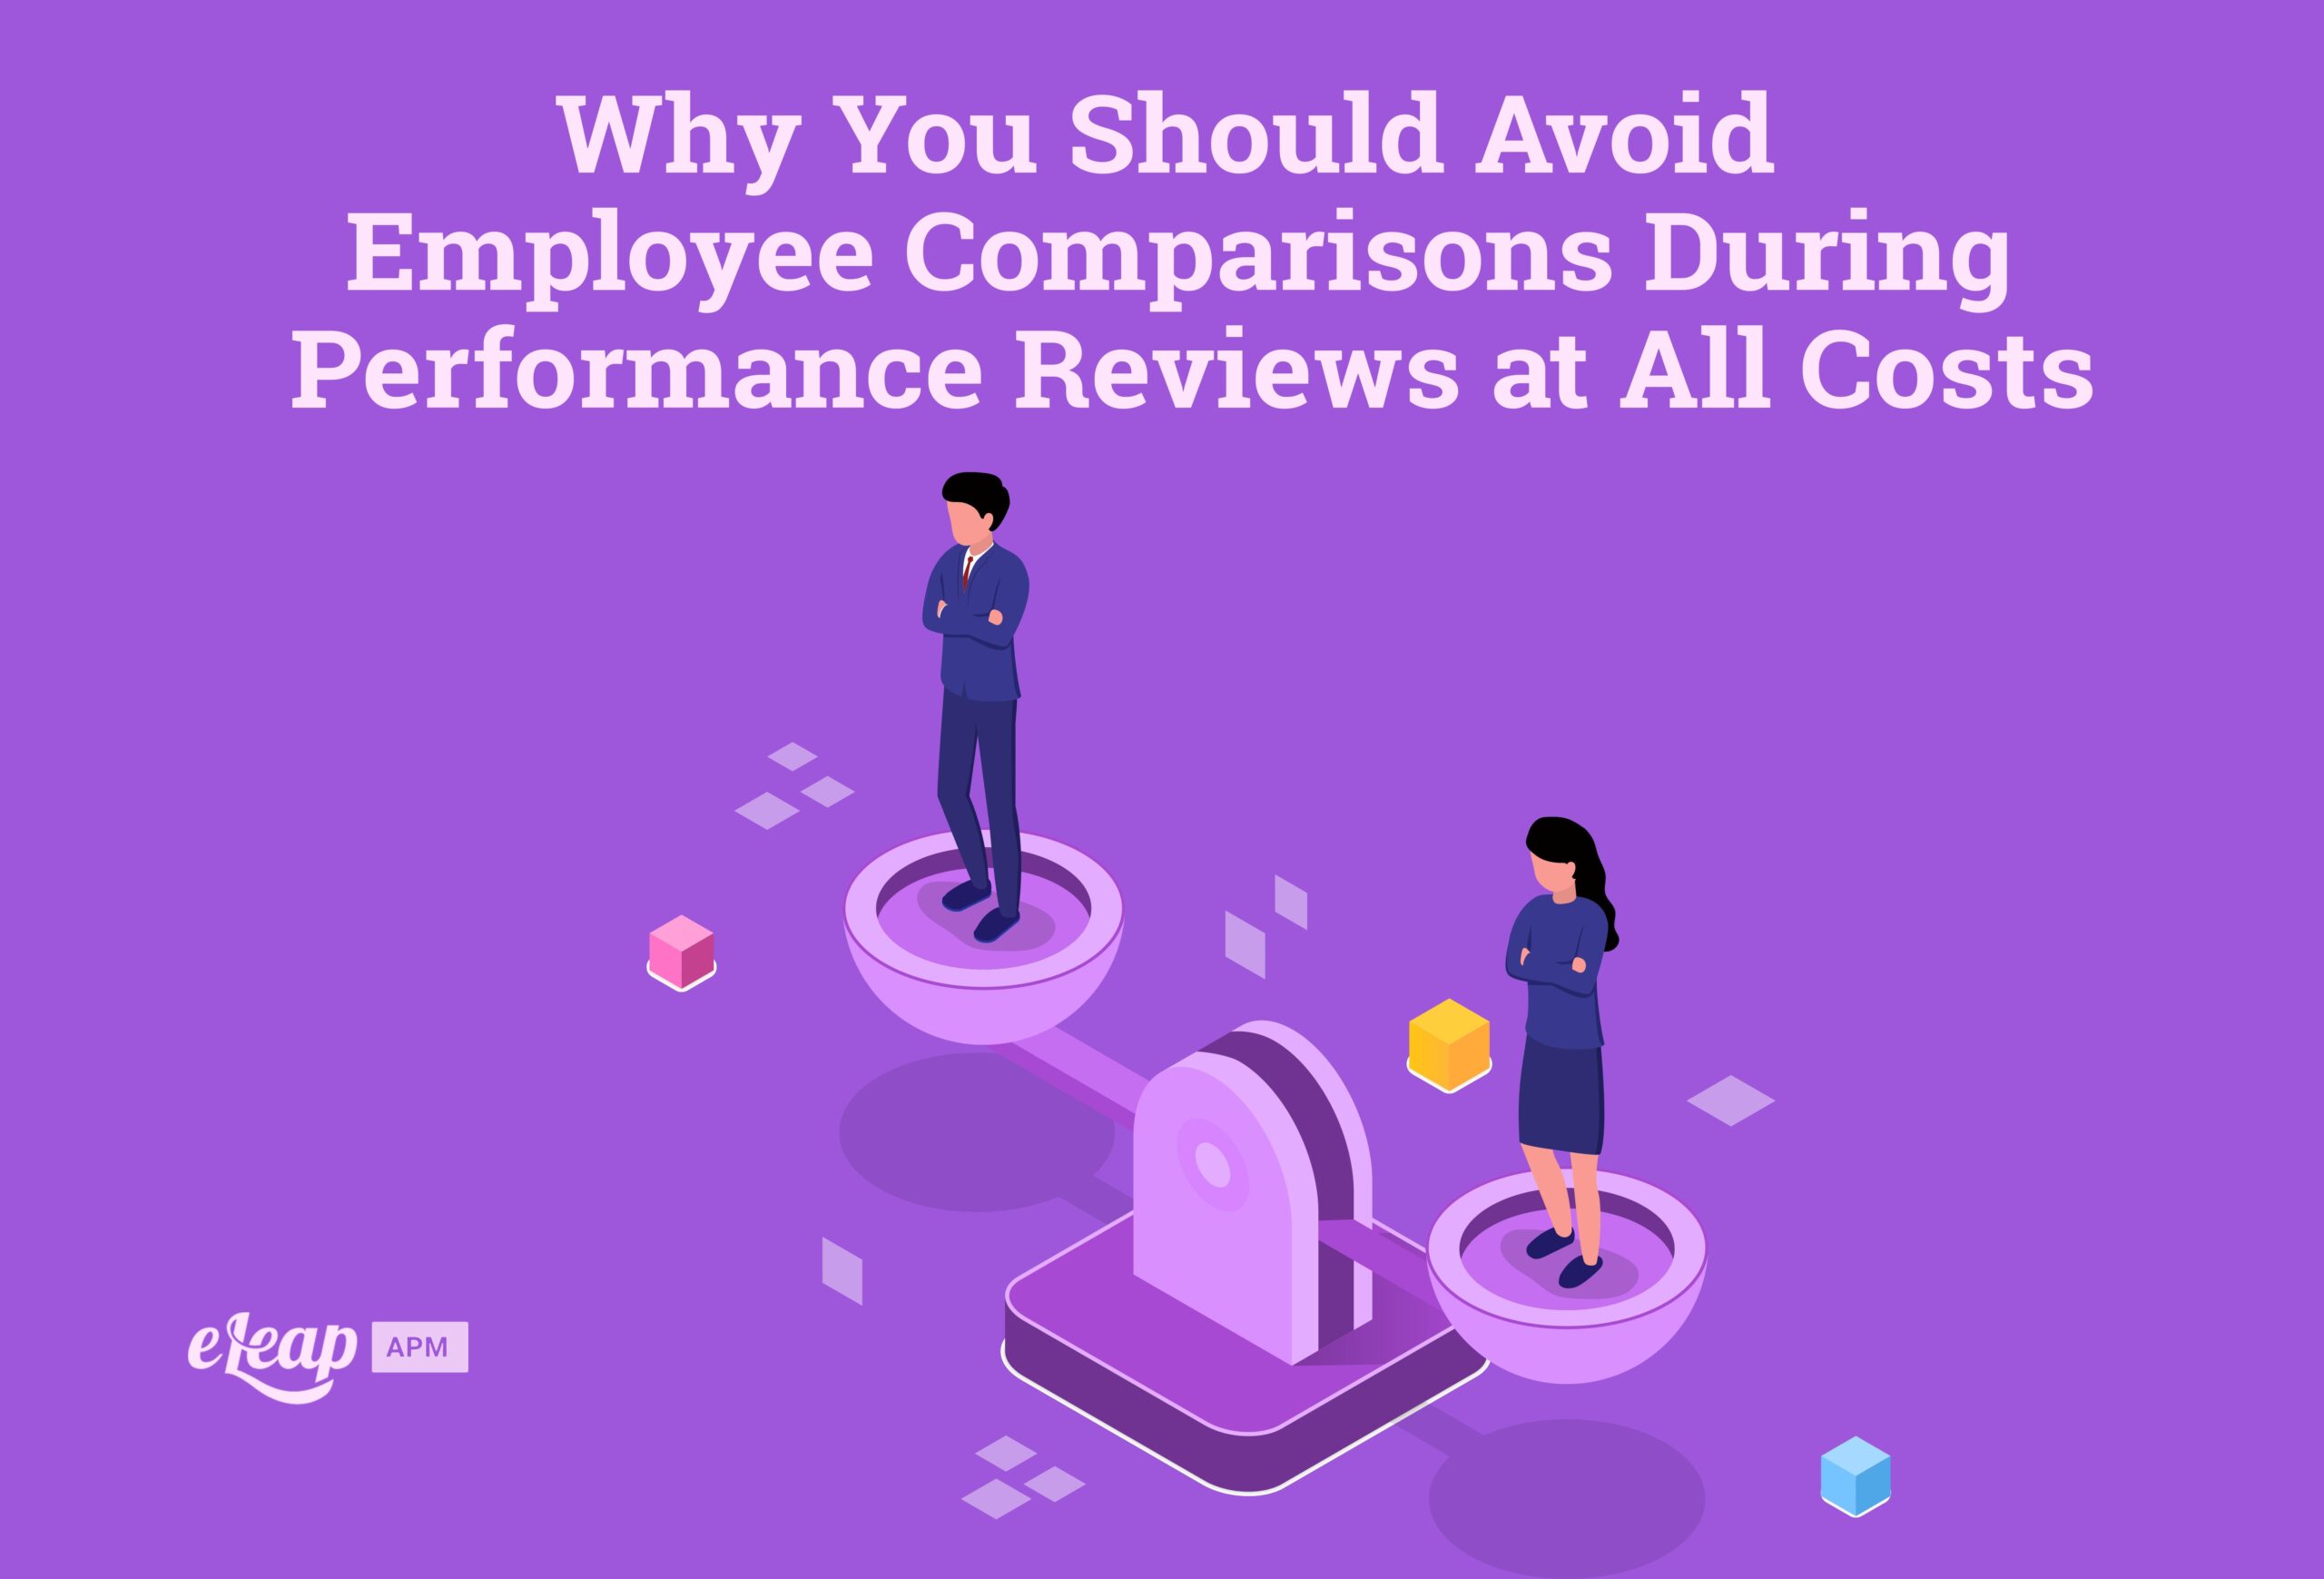 Why You Should Avoid Employee Comparisons During Performance Reviews at All Costs